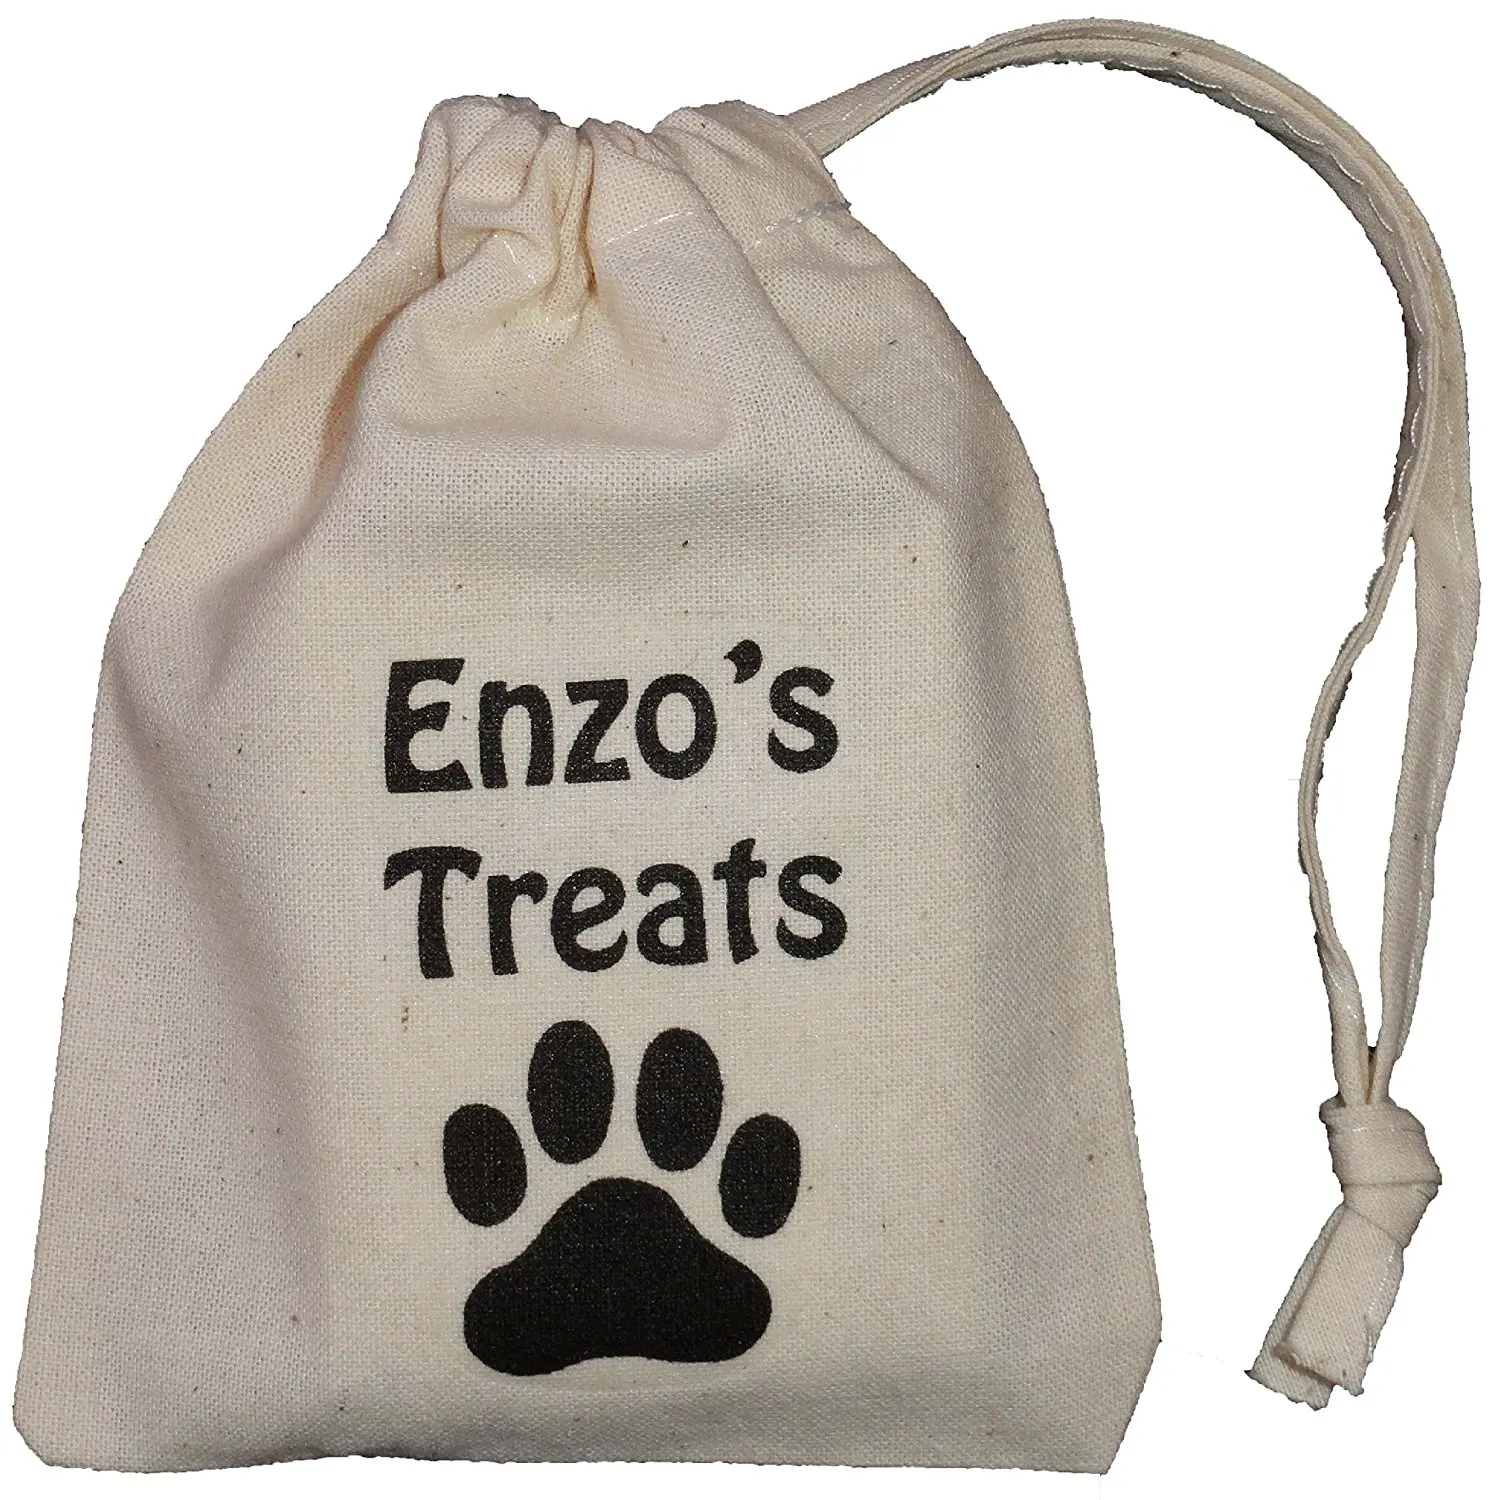 DOG TREAT BAG SMALL COTTON DRAWSTRING BAG Supplied empty PERSONALISED